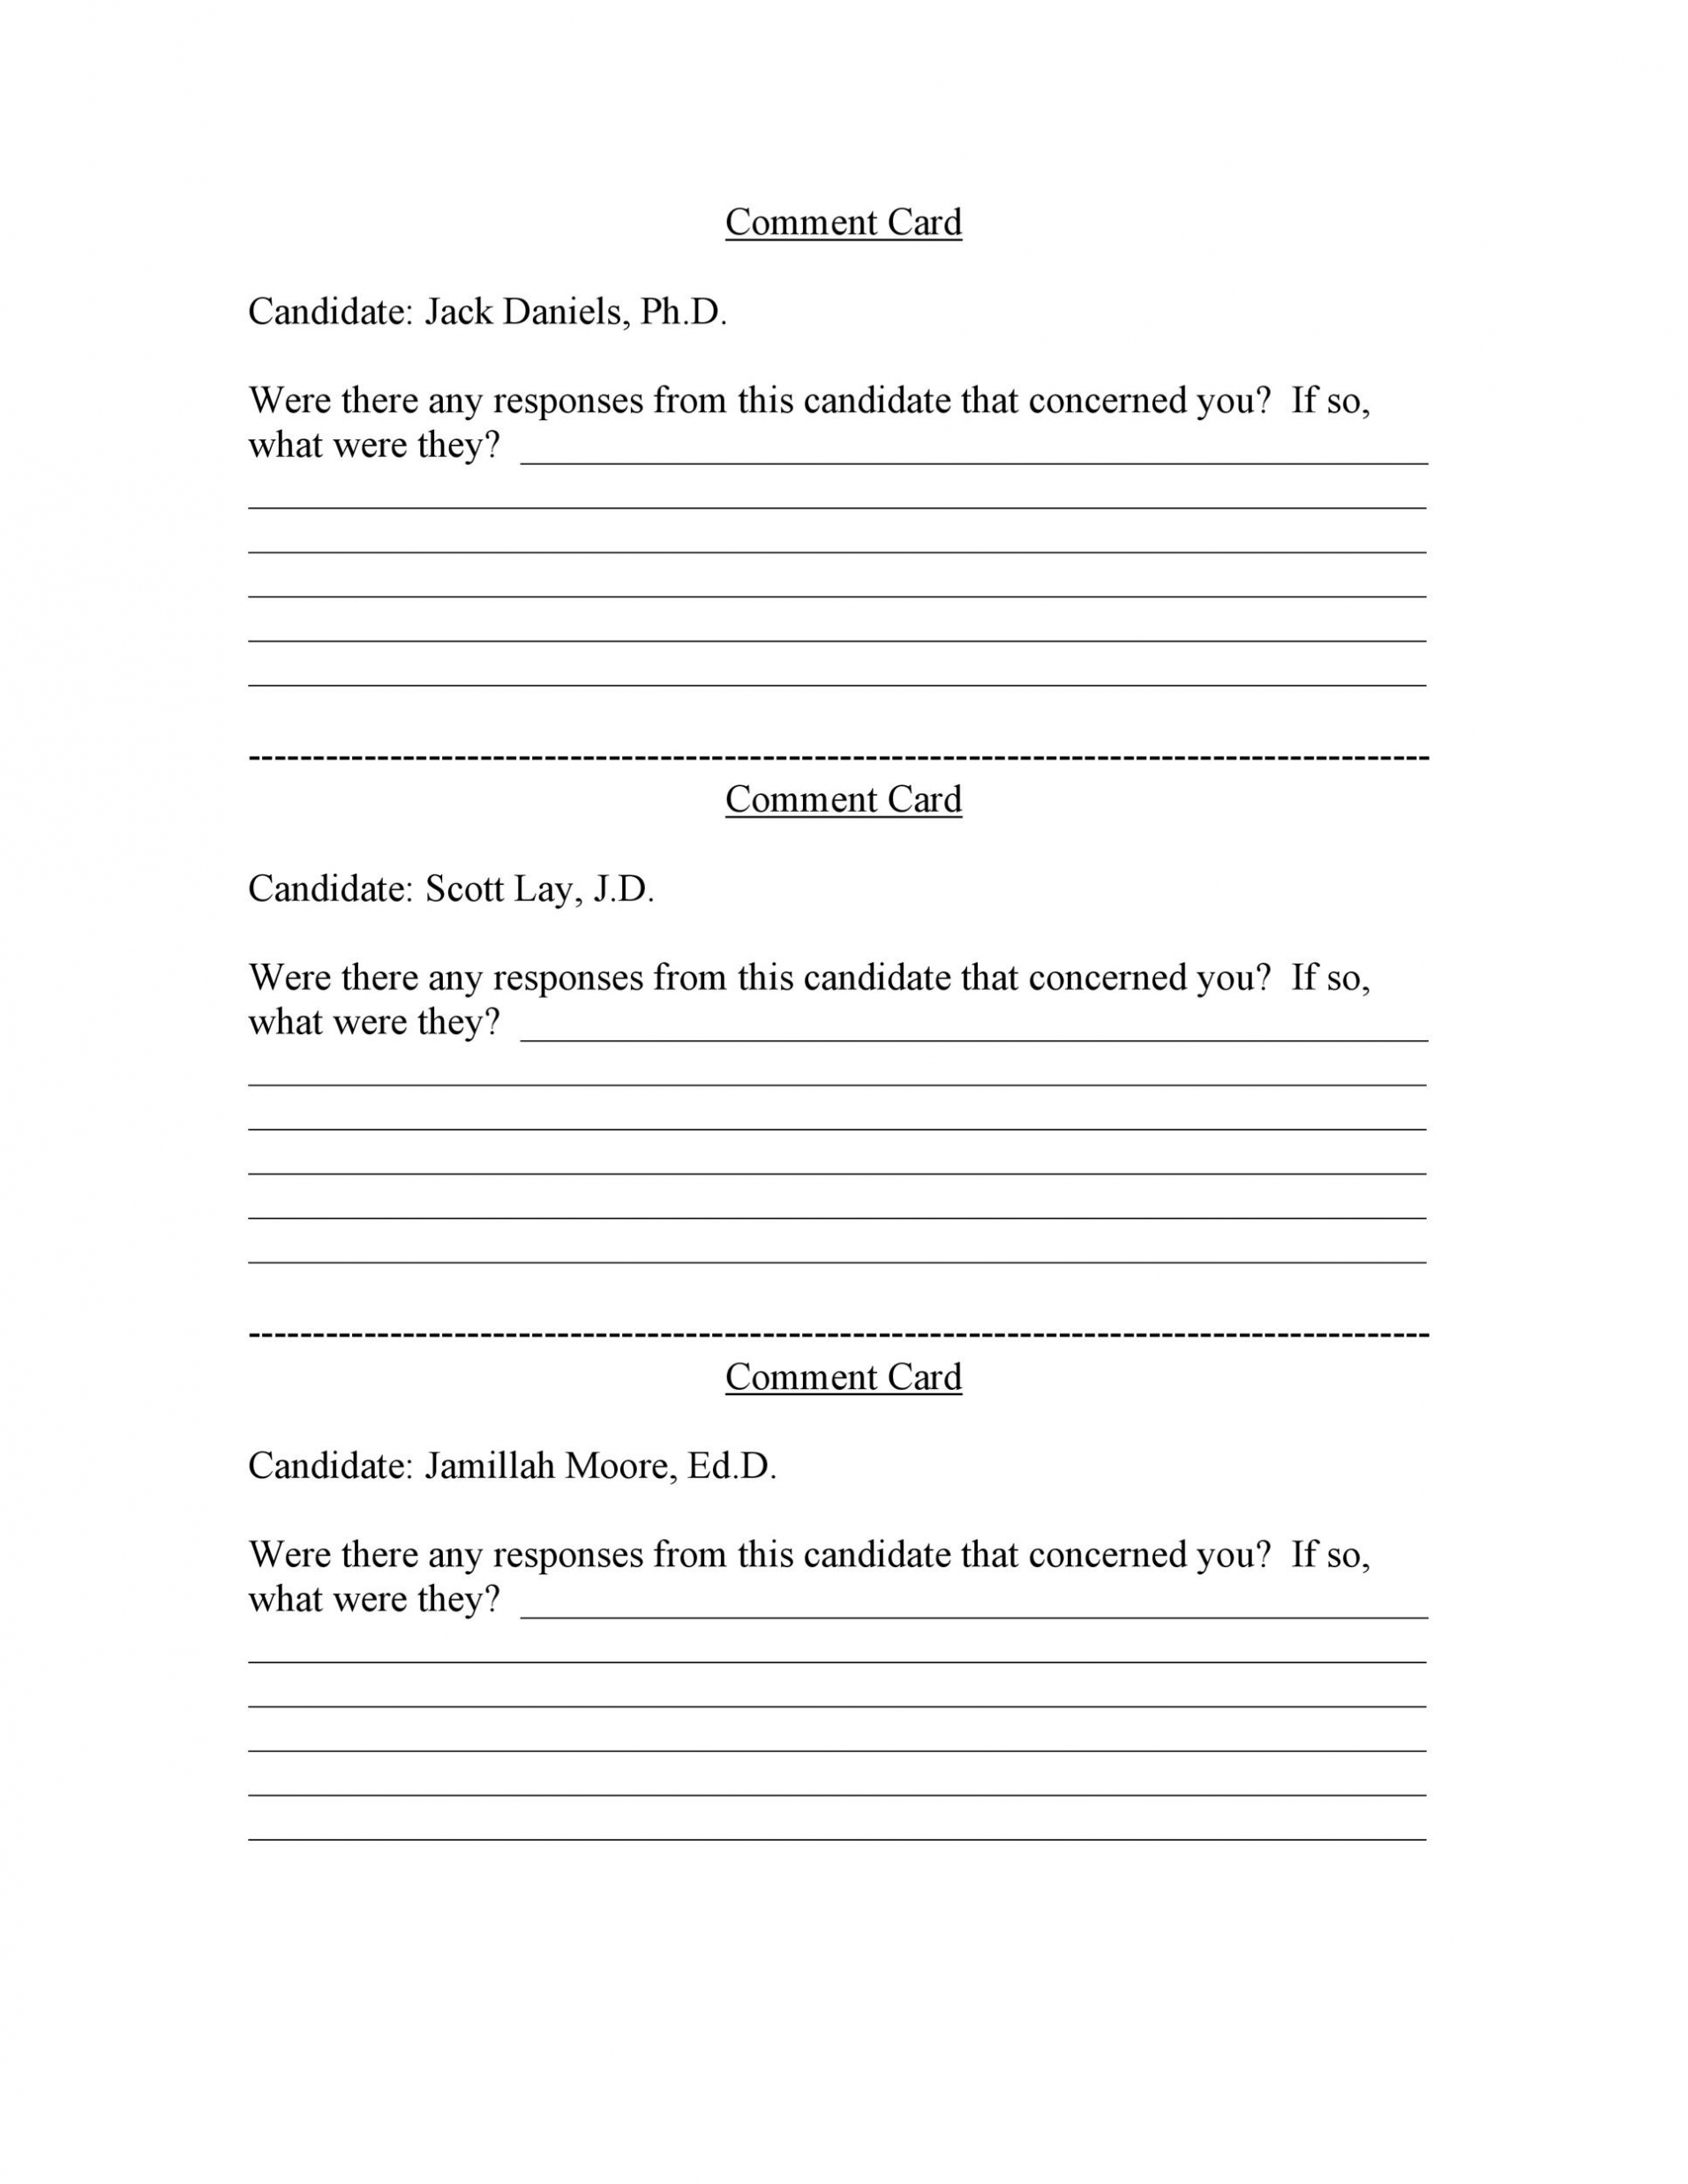 restaurant-comment-card-template-creative-inspirational-template-examples